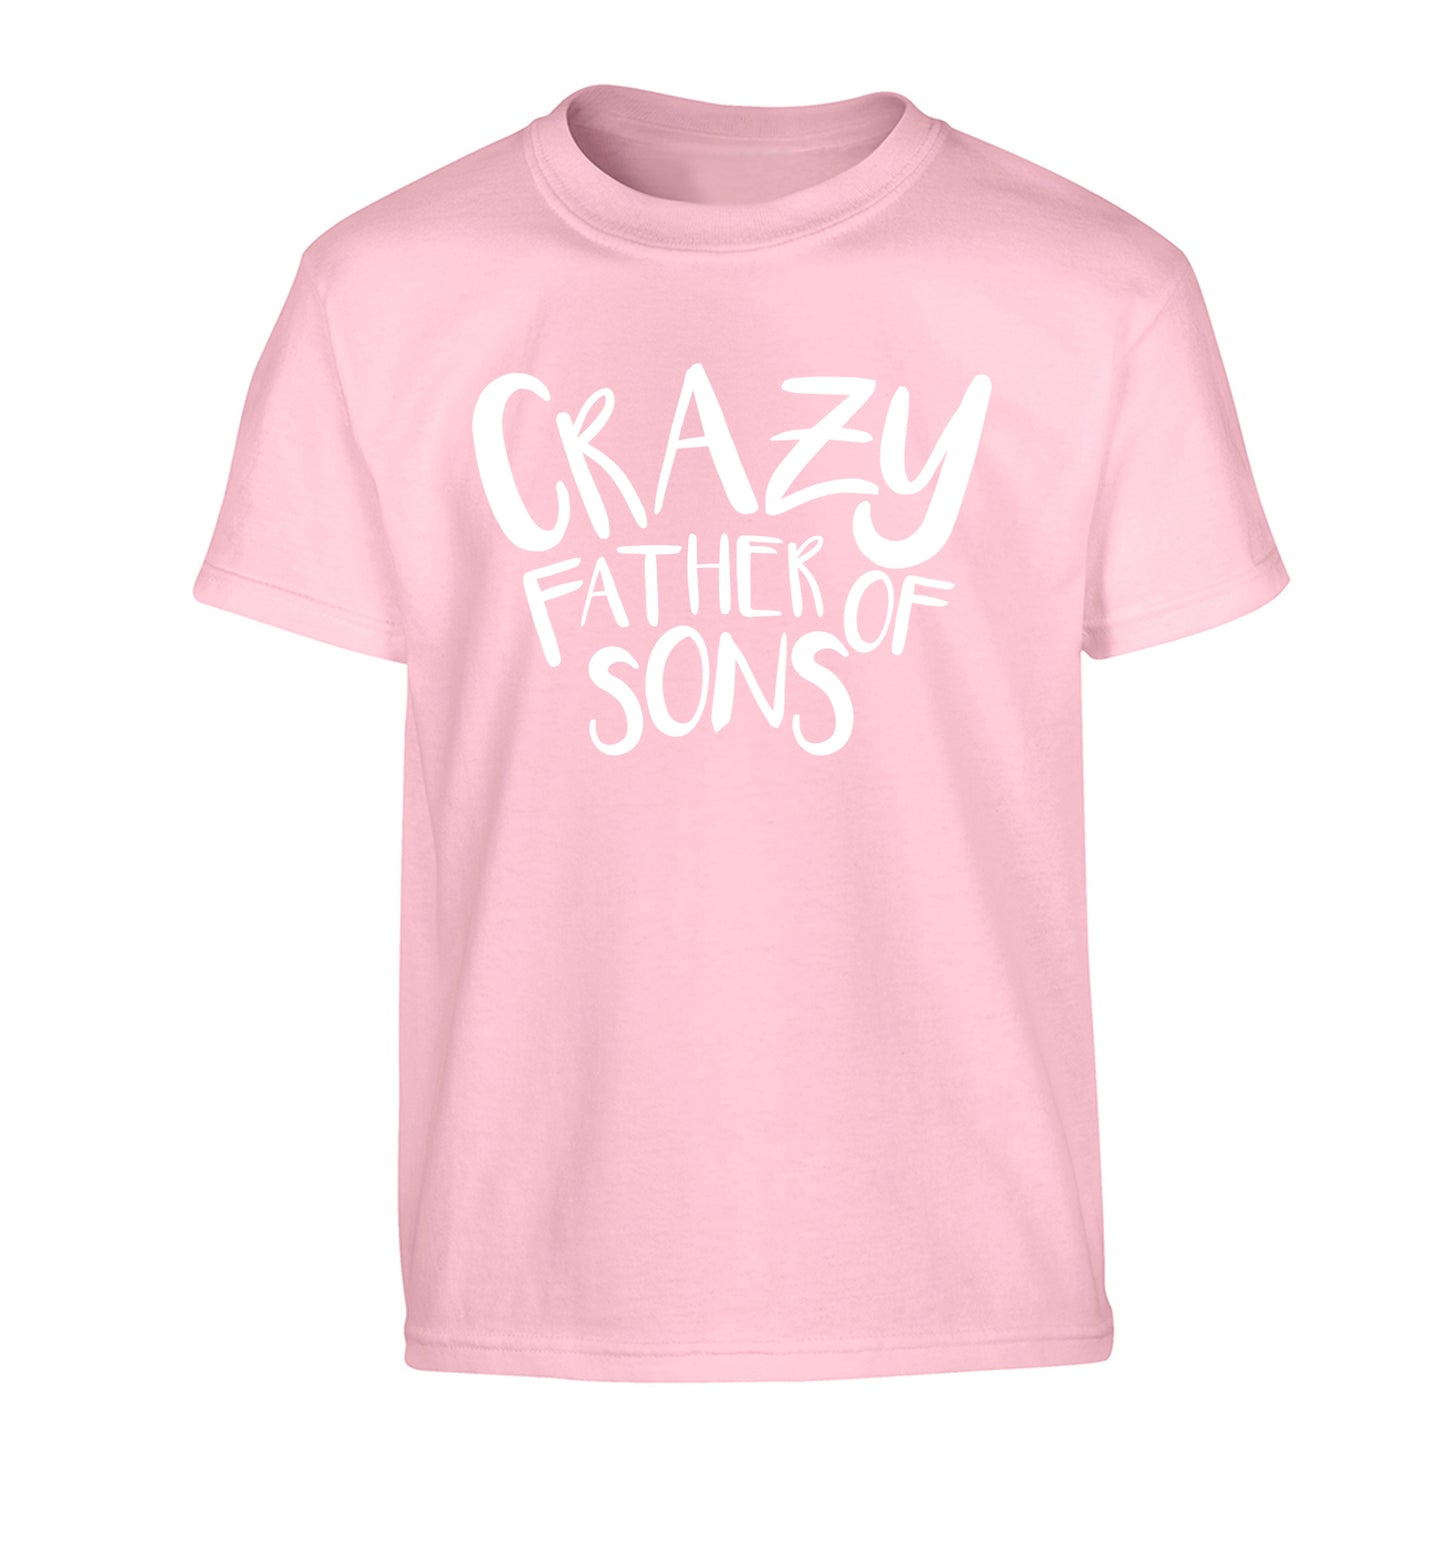 Crazy father of sons Children's light pink Tshirt 12-13 Years